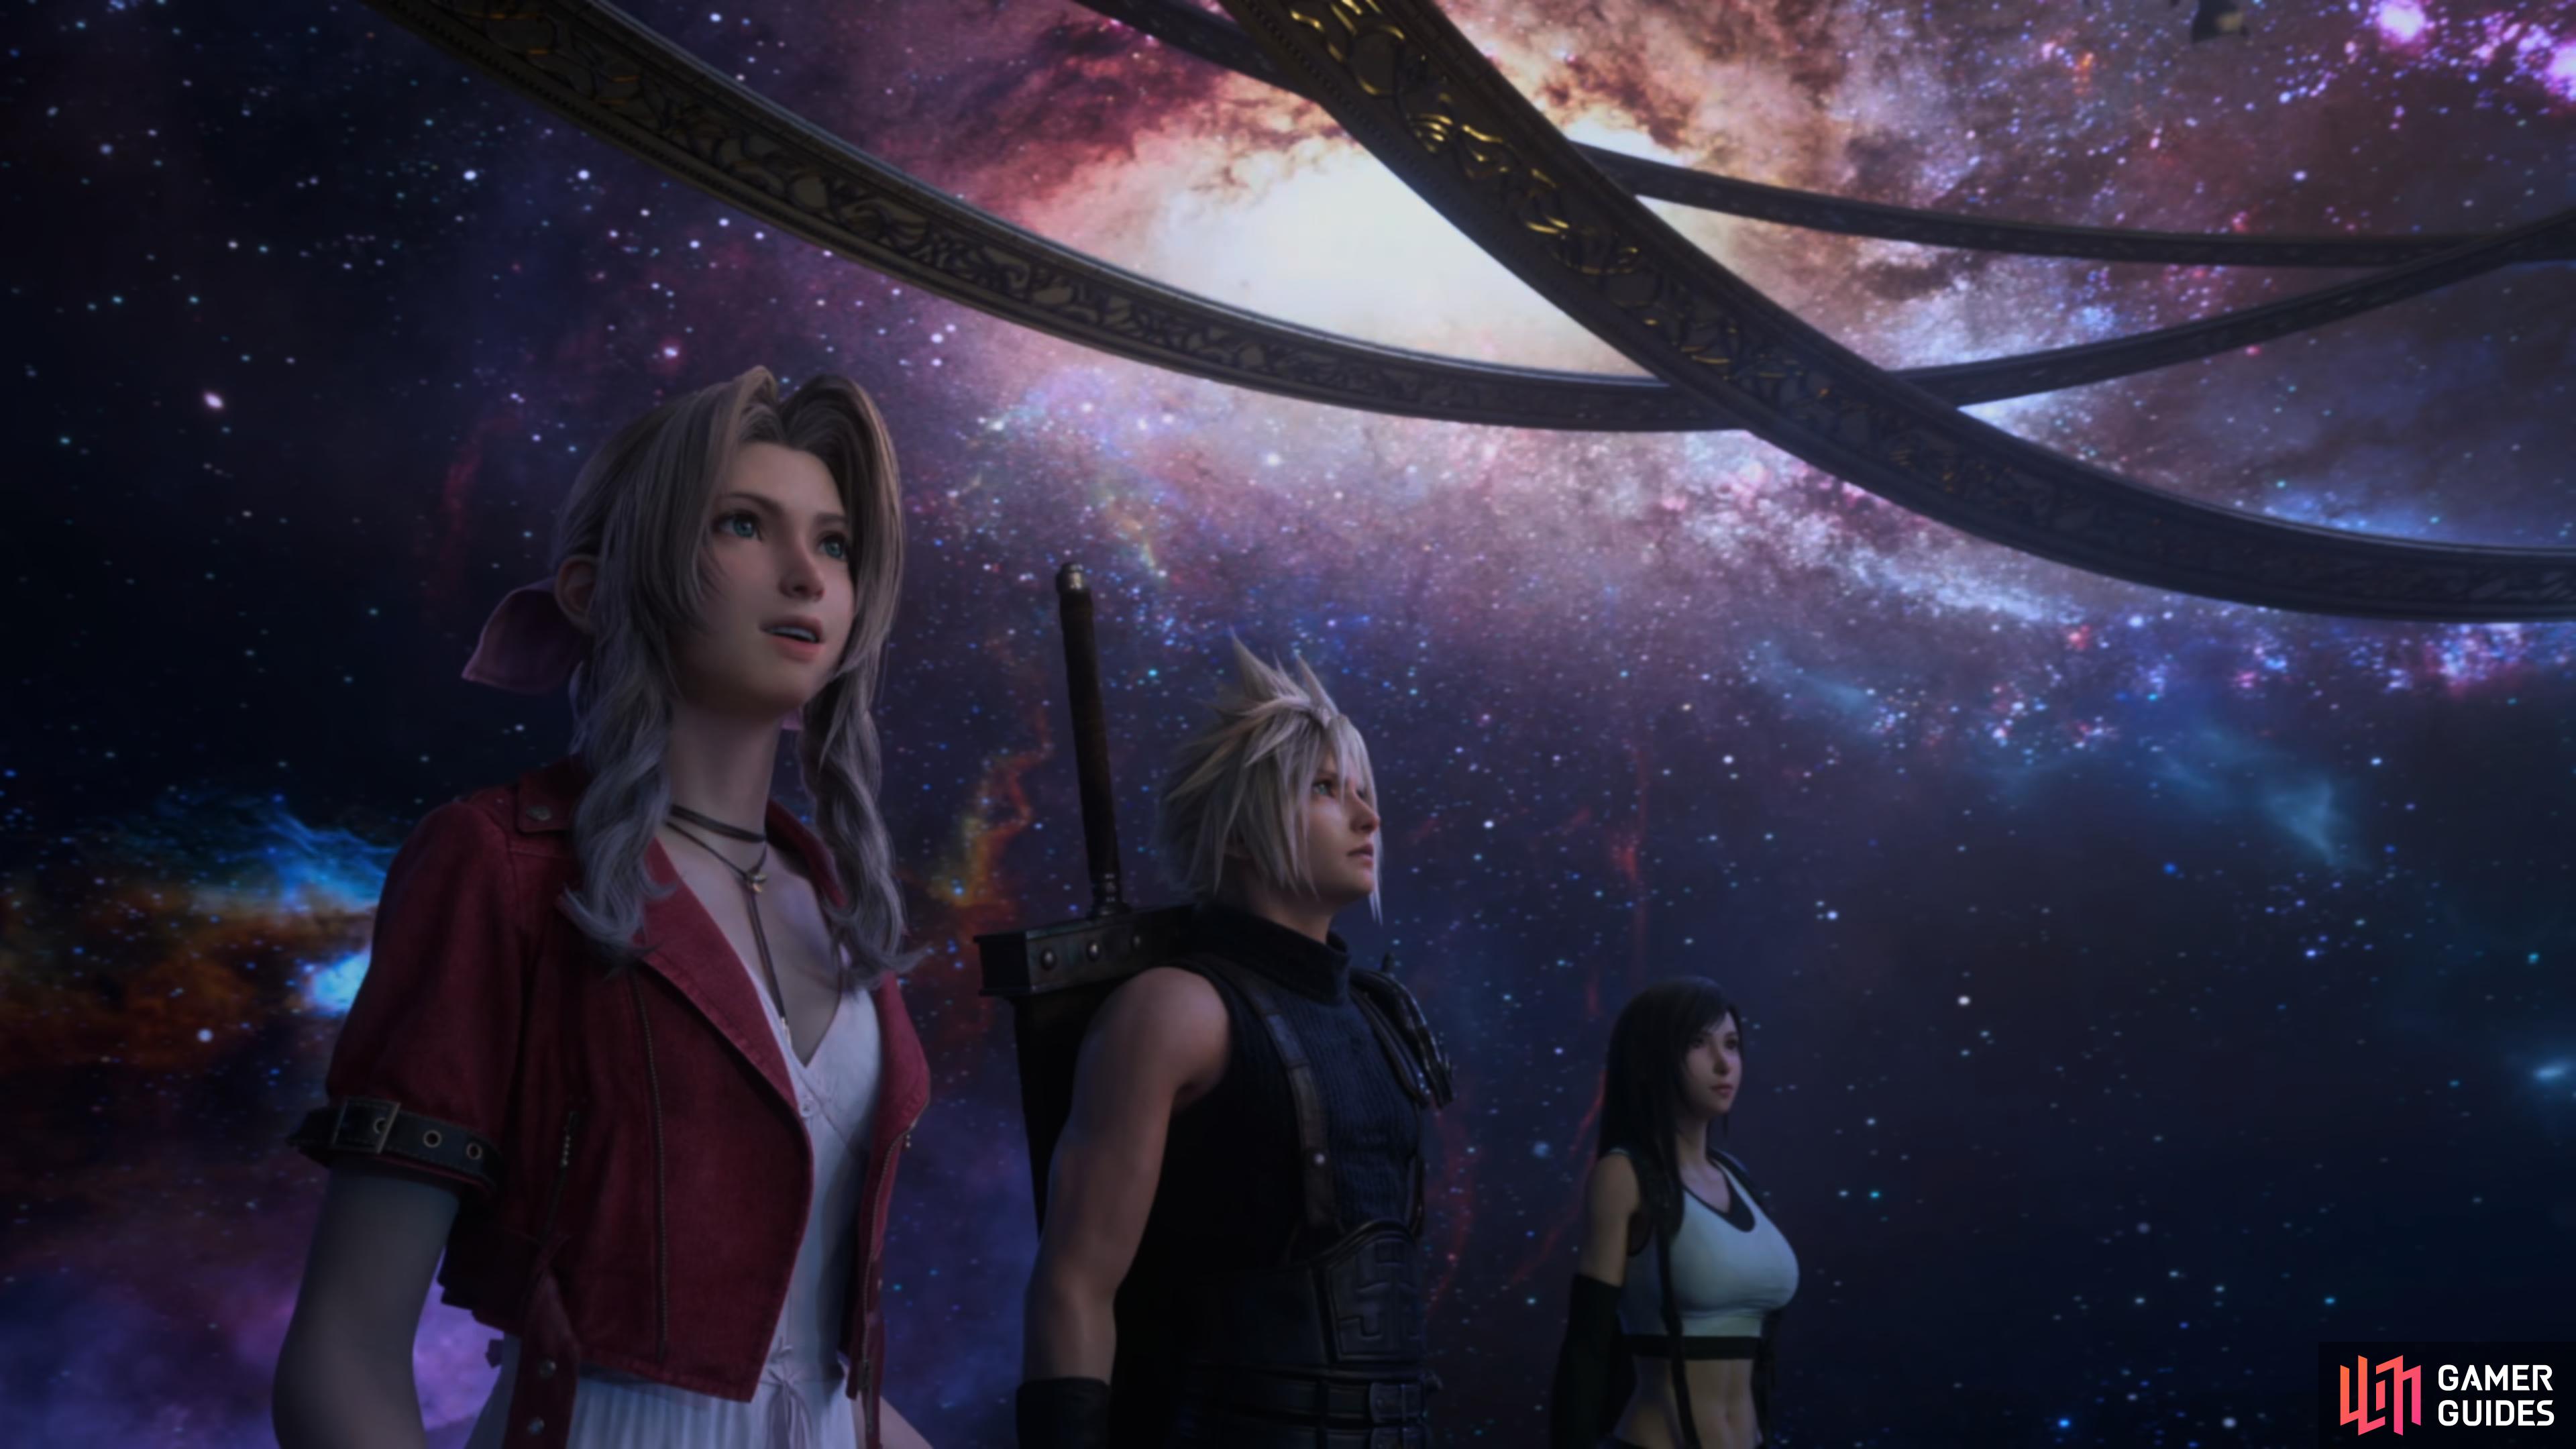 Aerith, Cloud and Tifa take an interesting lesson.